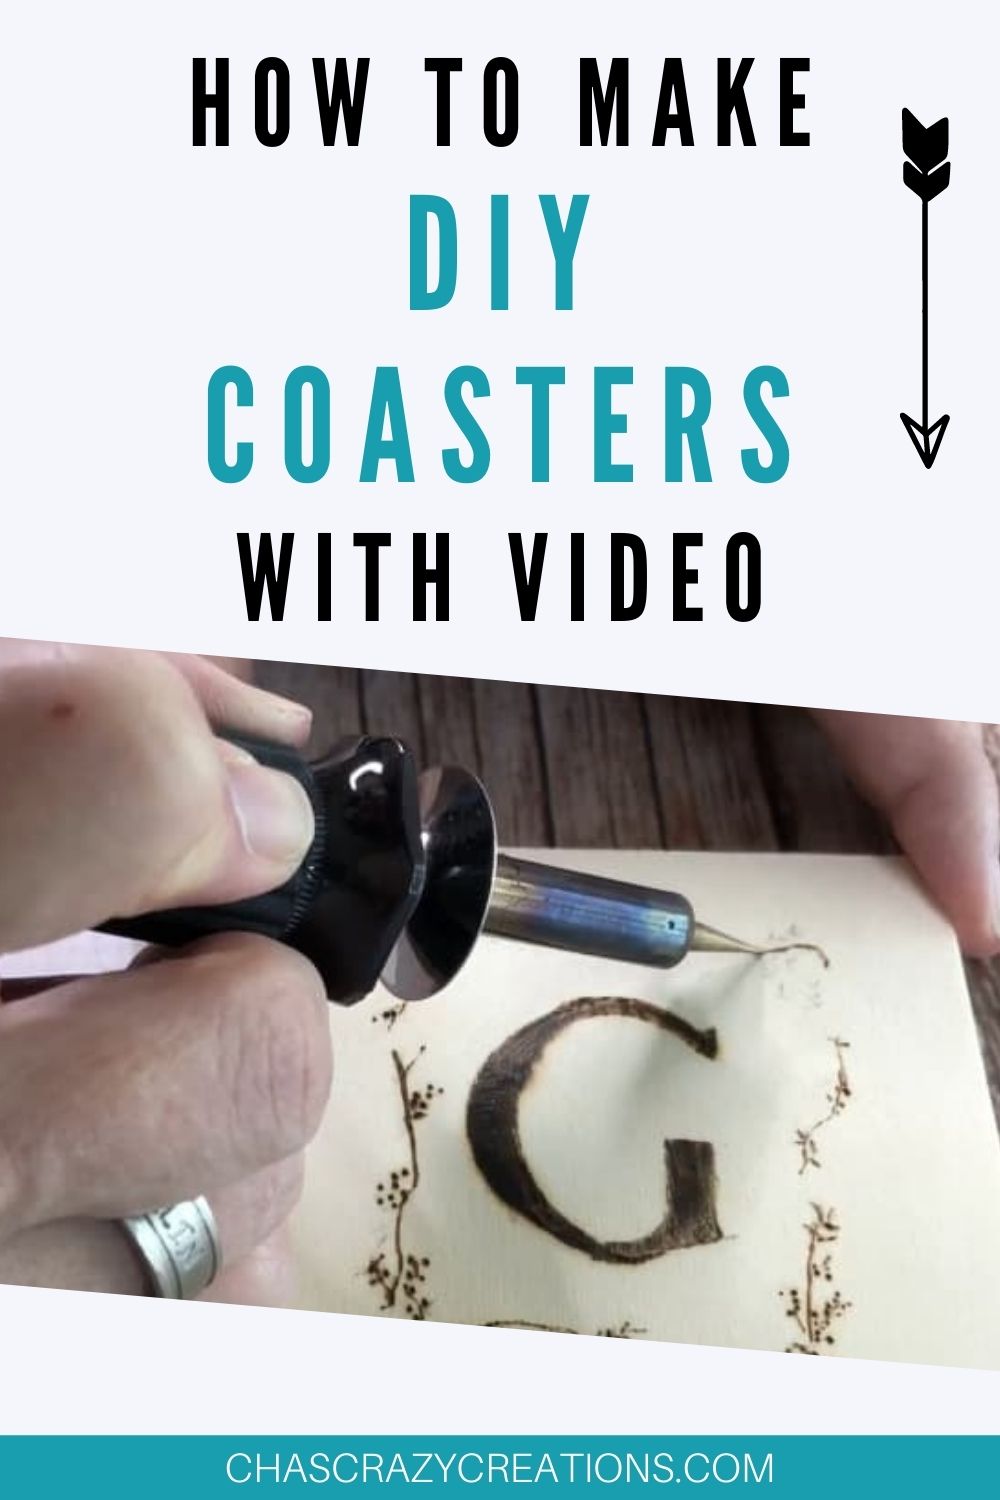 Do you want to make your own DIY coasters? I like to make gifts for all occasions and these can be useful items many people need. I have come up with 3 different sets that are easy to make.